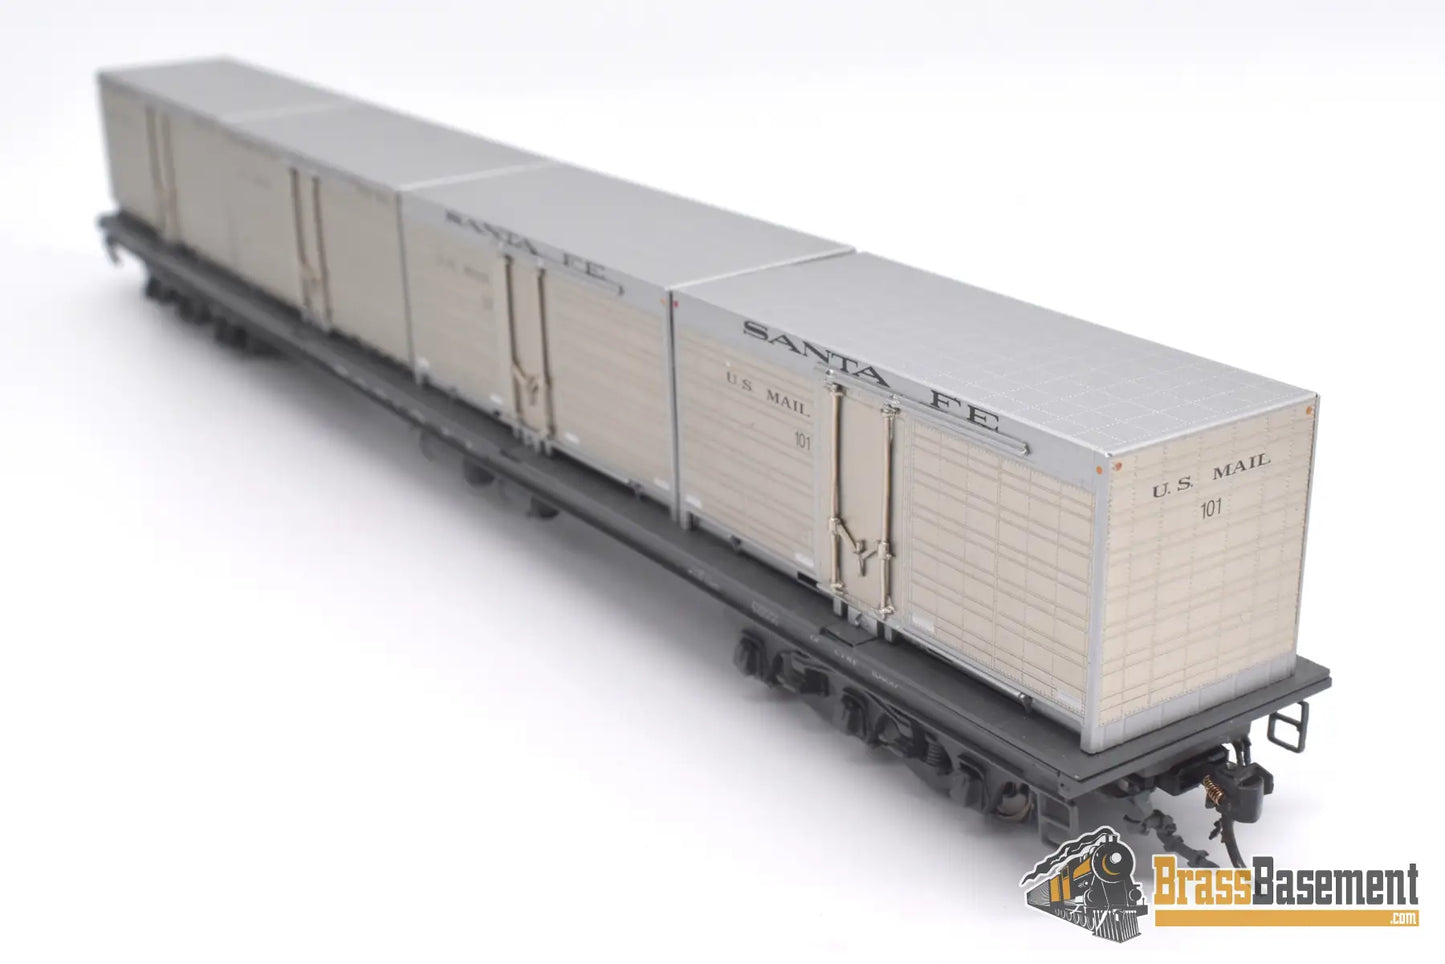 Ho Brass - Coach Yard 0477.1 Atsf Santa Fe Mail Container Flat #212 Factory Painted Sam - Tech